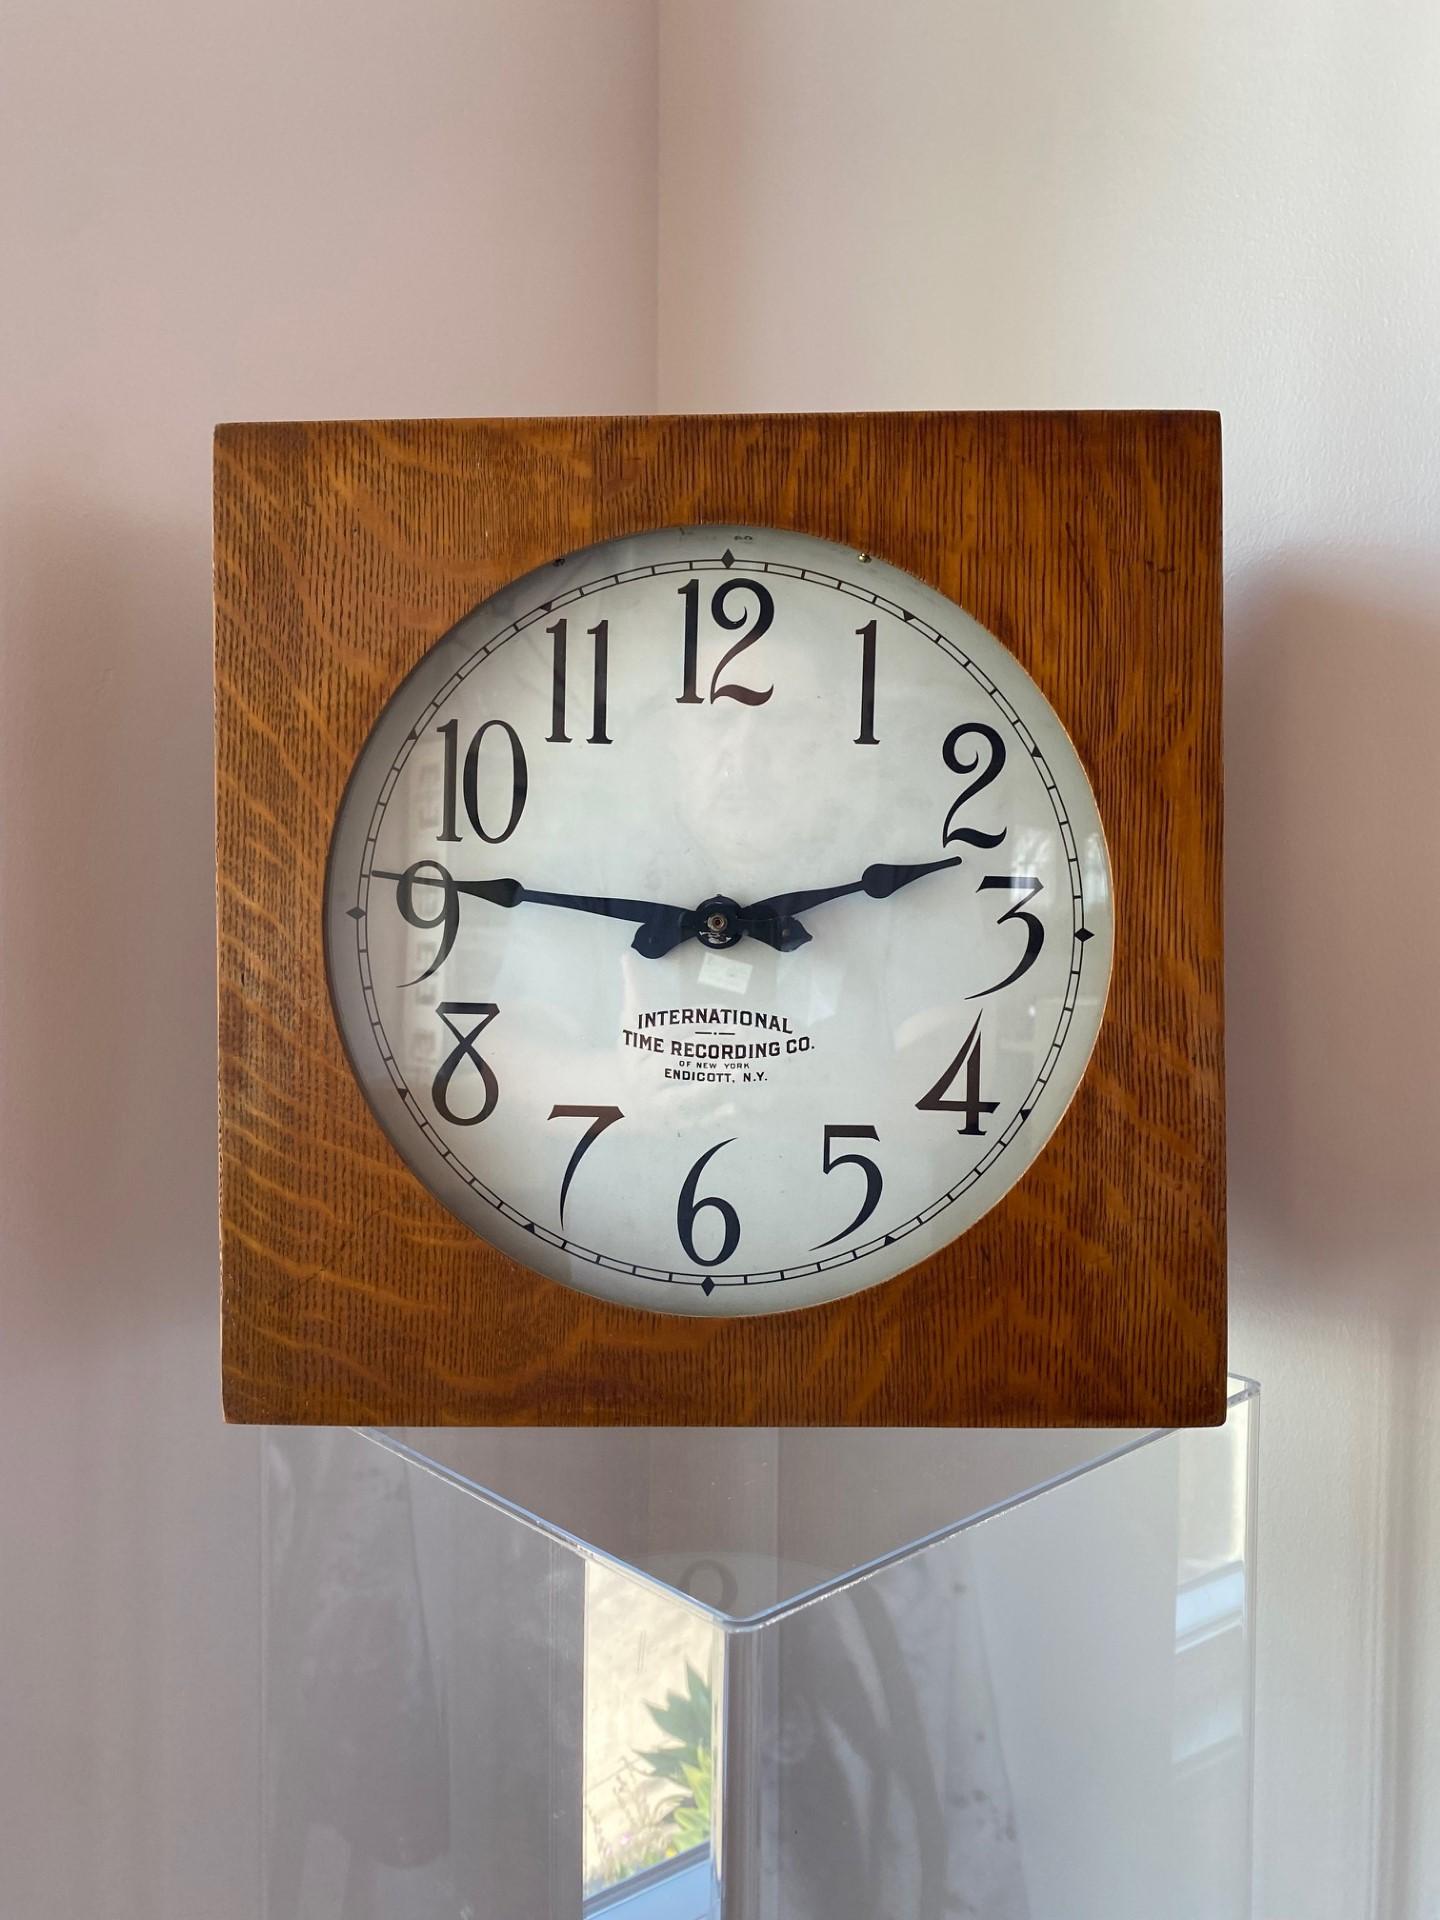 Beautiful antique clock from 1925 by the International Time Recording Company.  This piece originally was used in commercial/industrial settings.  The timepiece is encircled in a square shape wood base with glass on the front. Unique and nostalgic